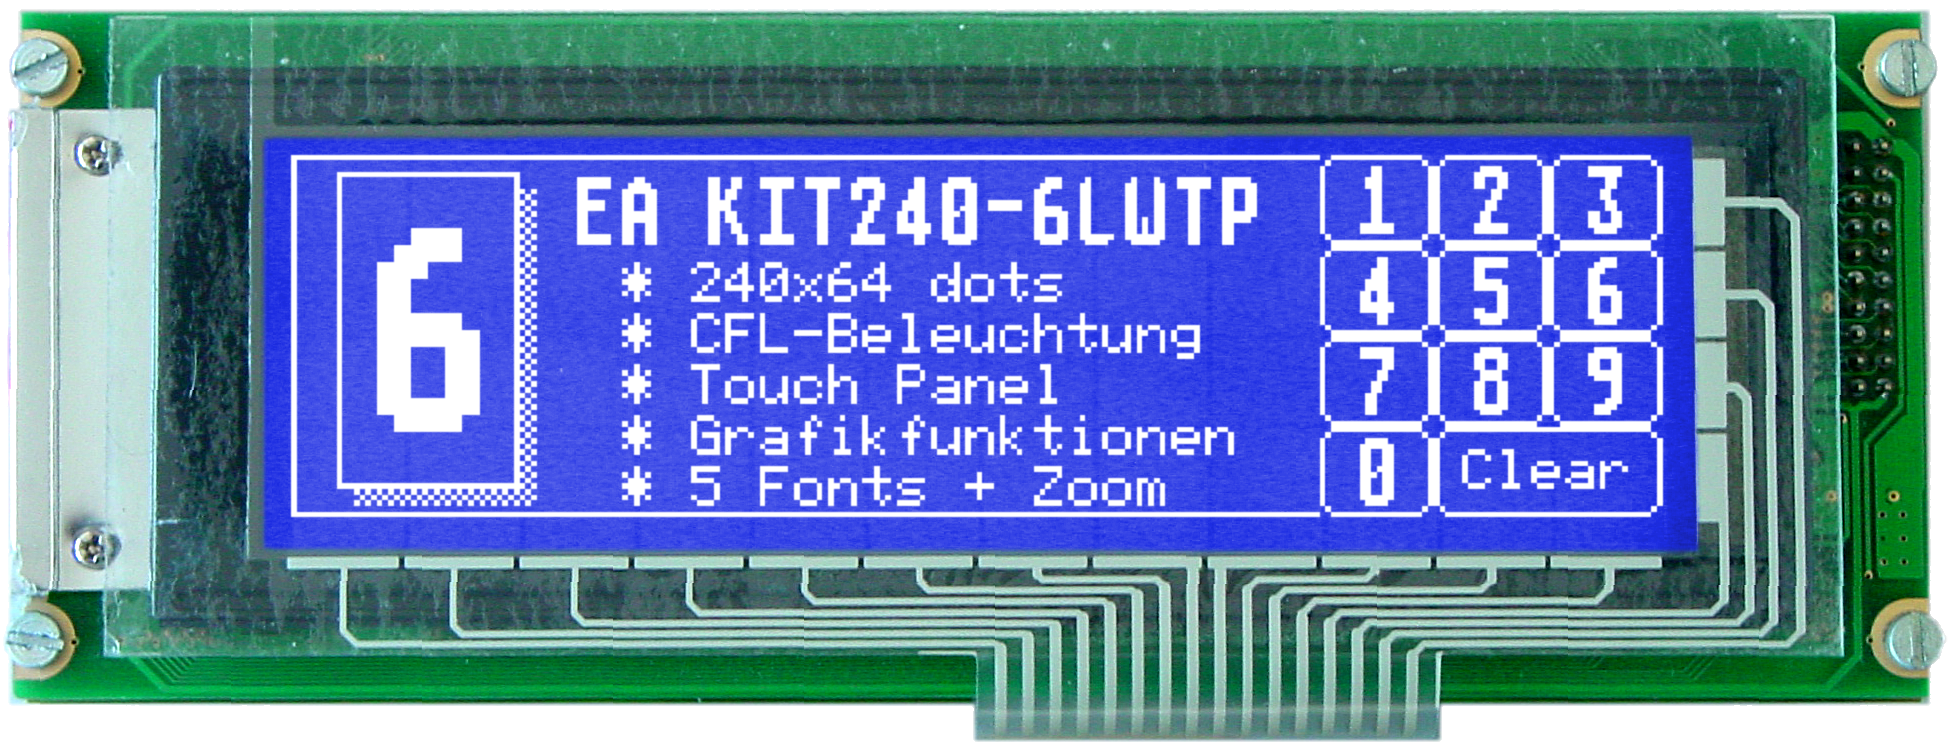 5.4" Serial HMI Graphic display with touch-screen